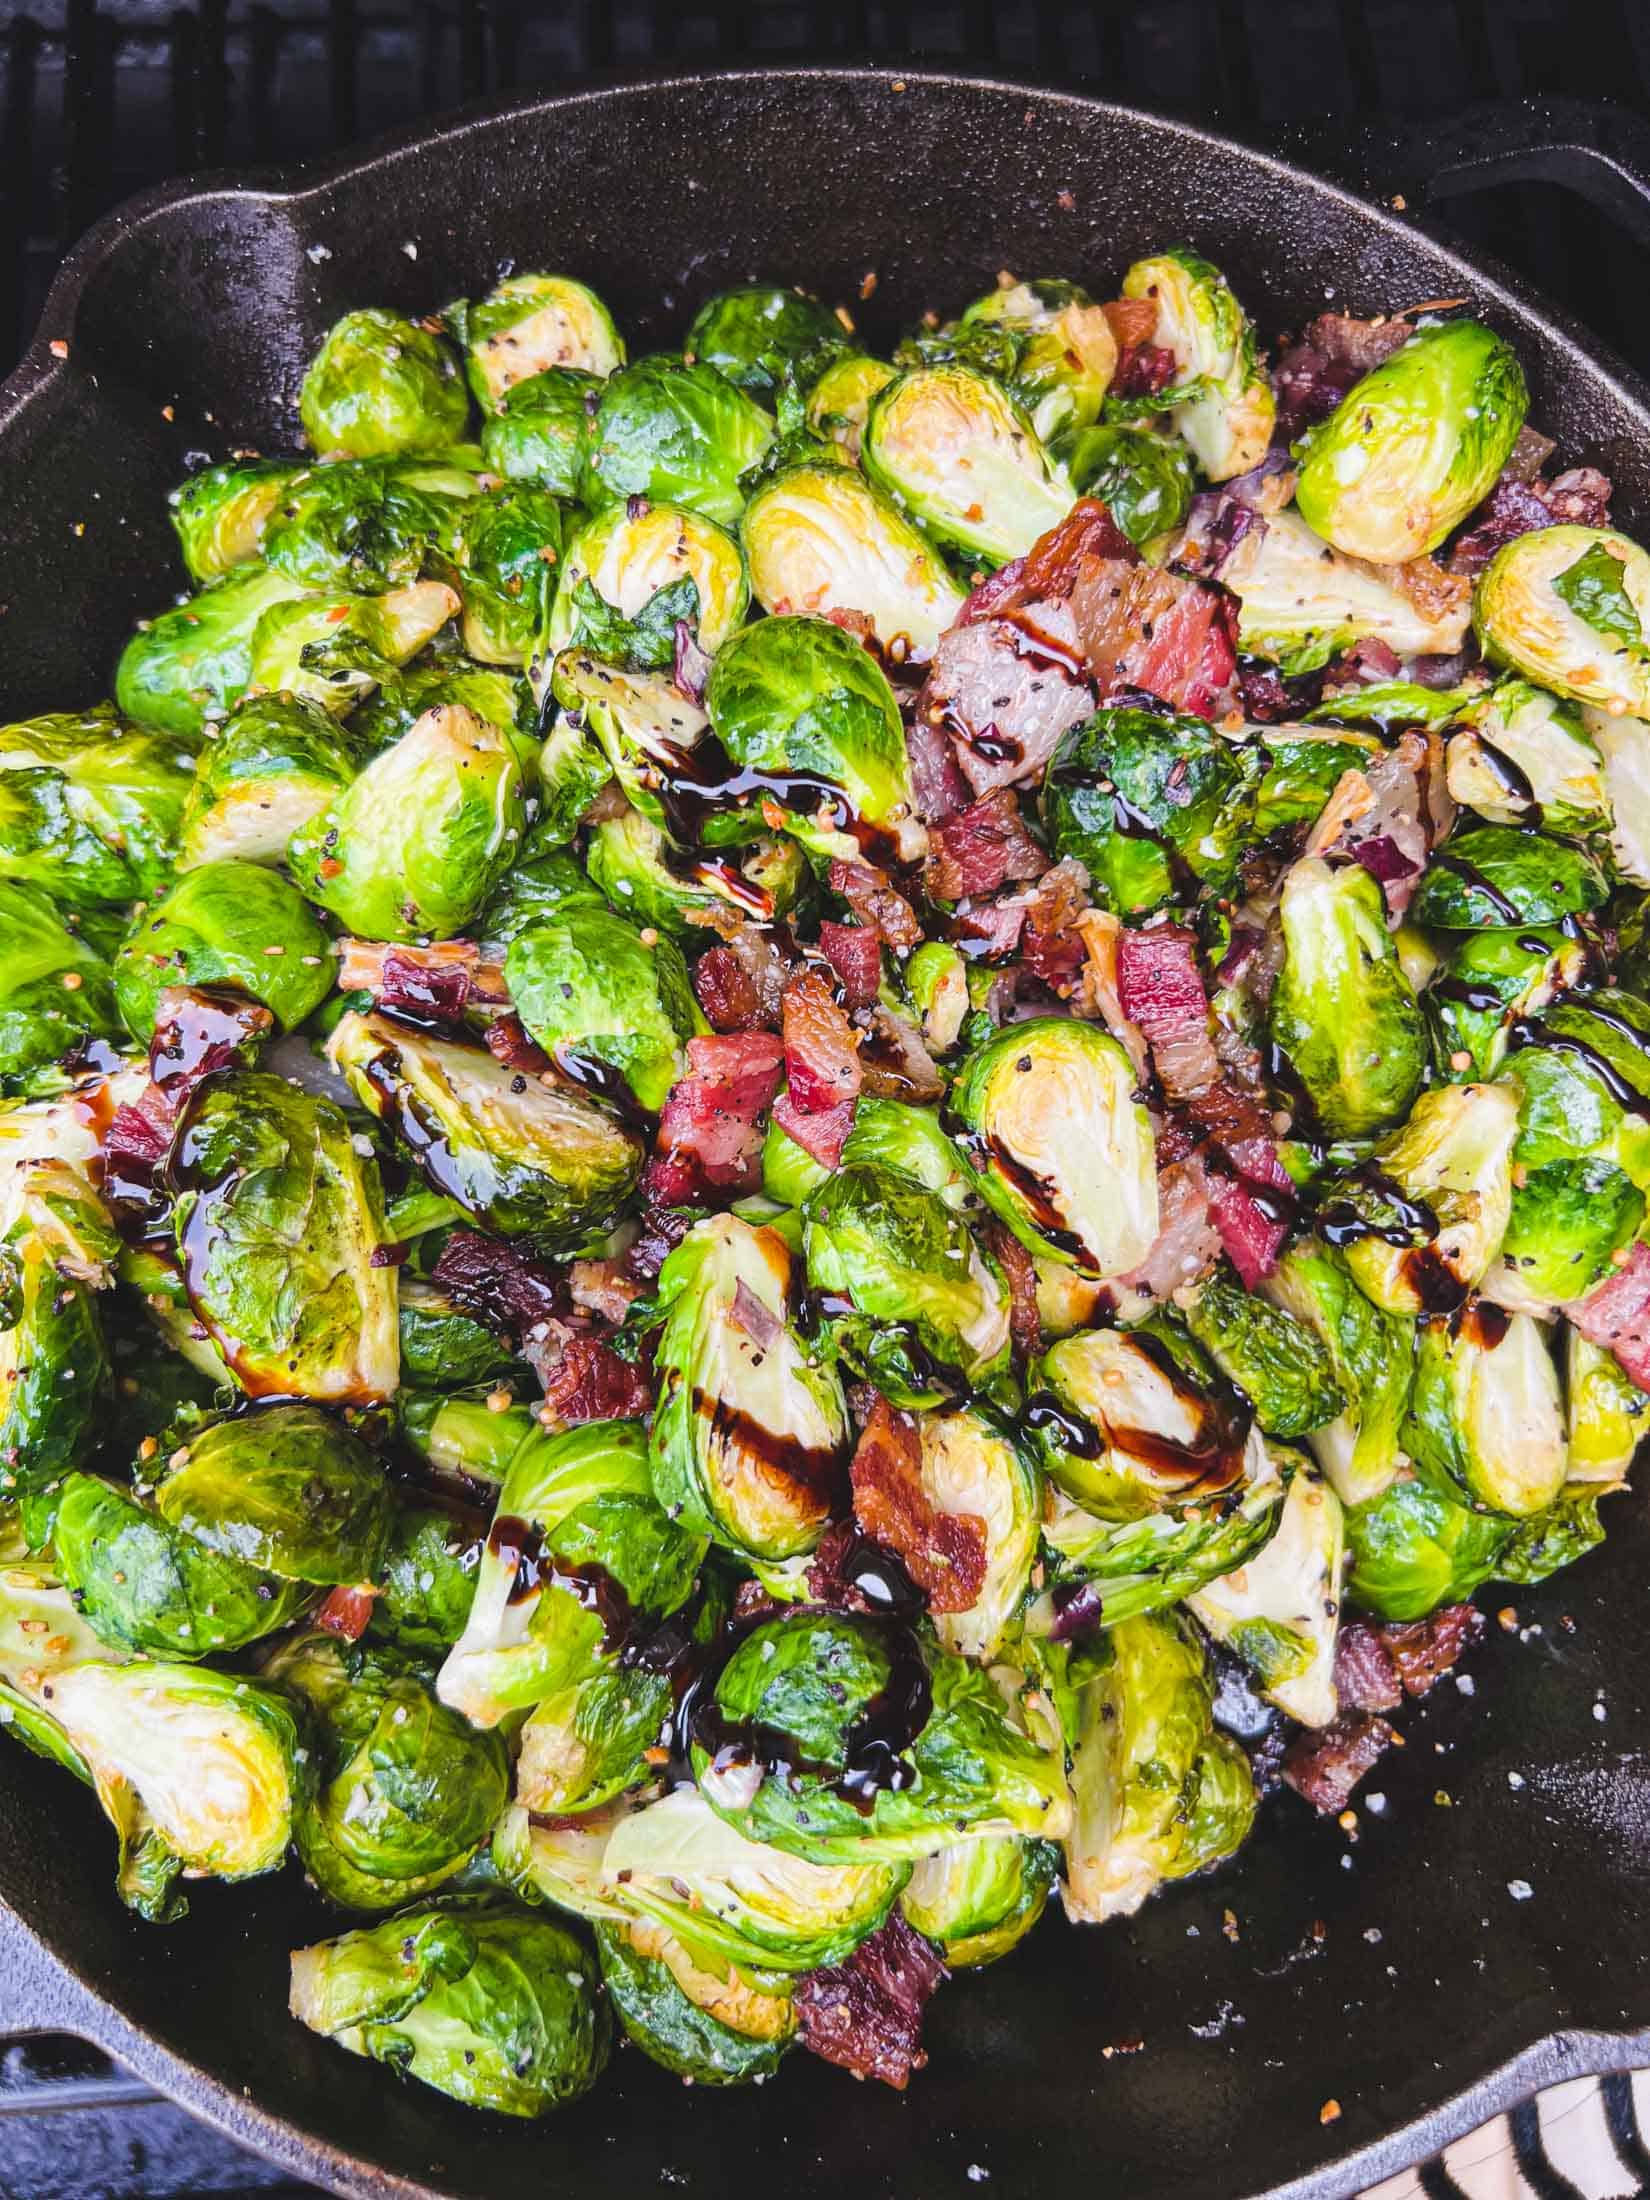 Crispy brussels sprouts in a cast iron skillet with balsamic glaze drizzled on top on the smoker.